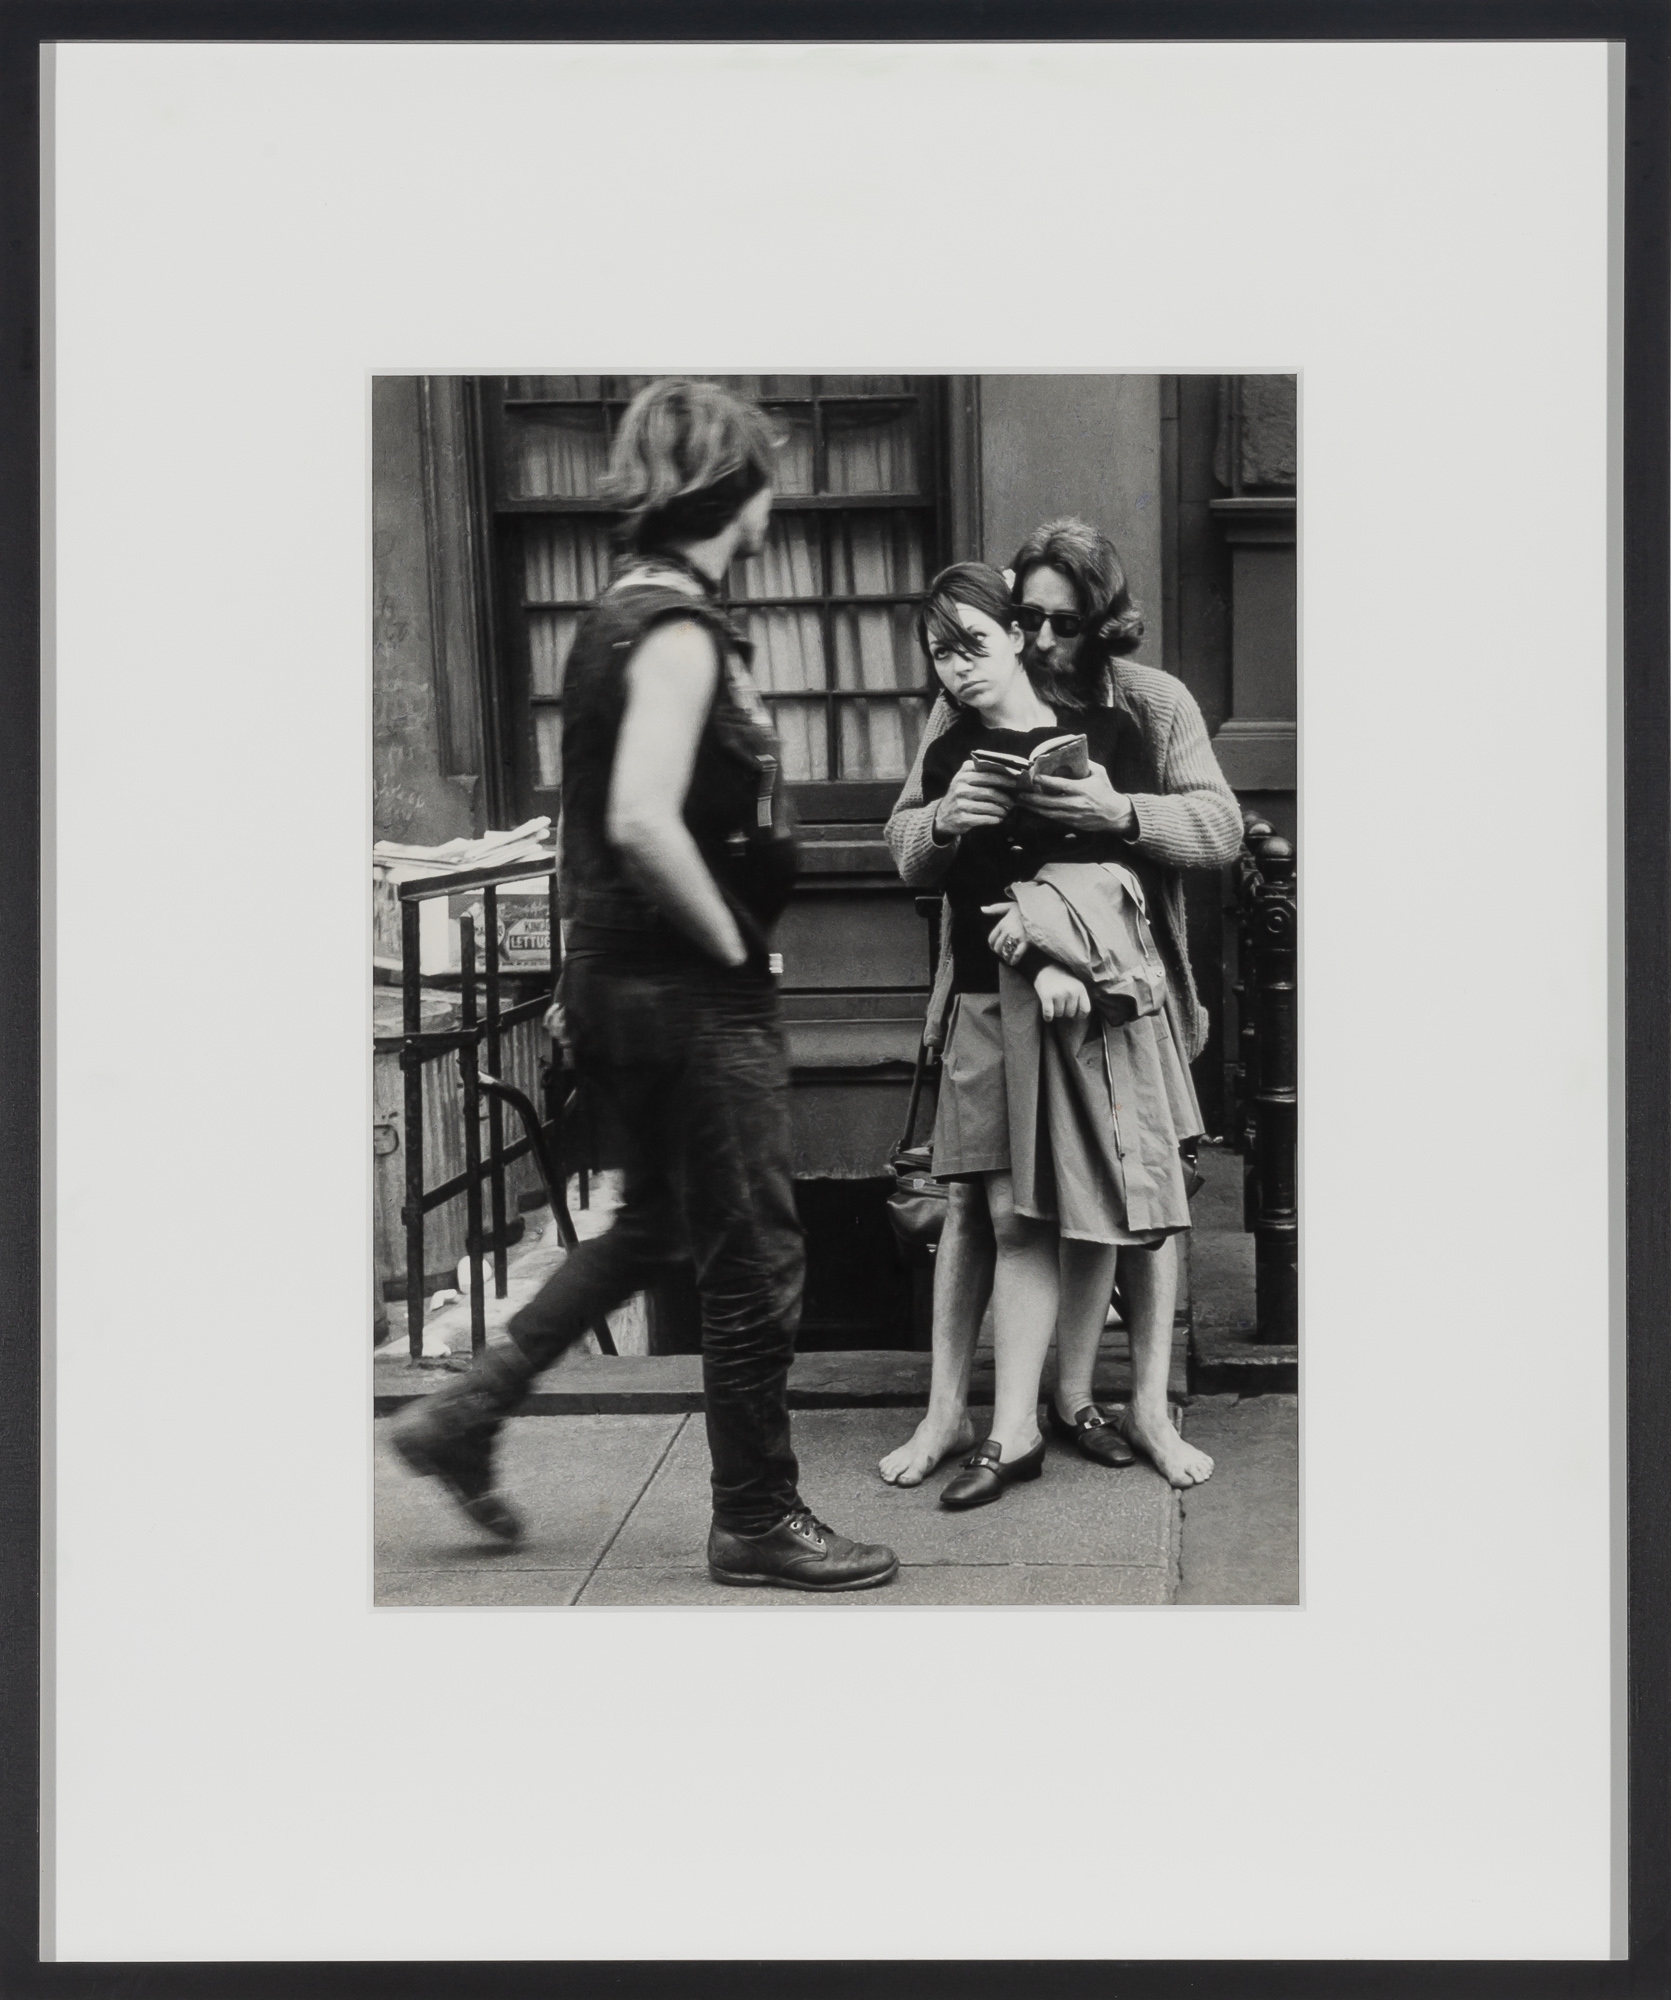 Artwork by Leon Levinstein, LEVINSTEIN, LEON (1913-1988) Untitled [couple on street, man reading to woman, barefoot],, Made of Vintage gelatin silver print